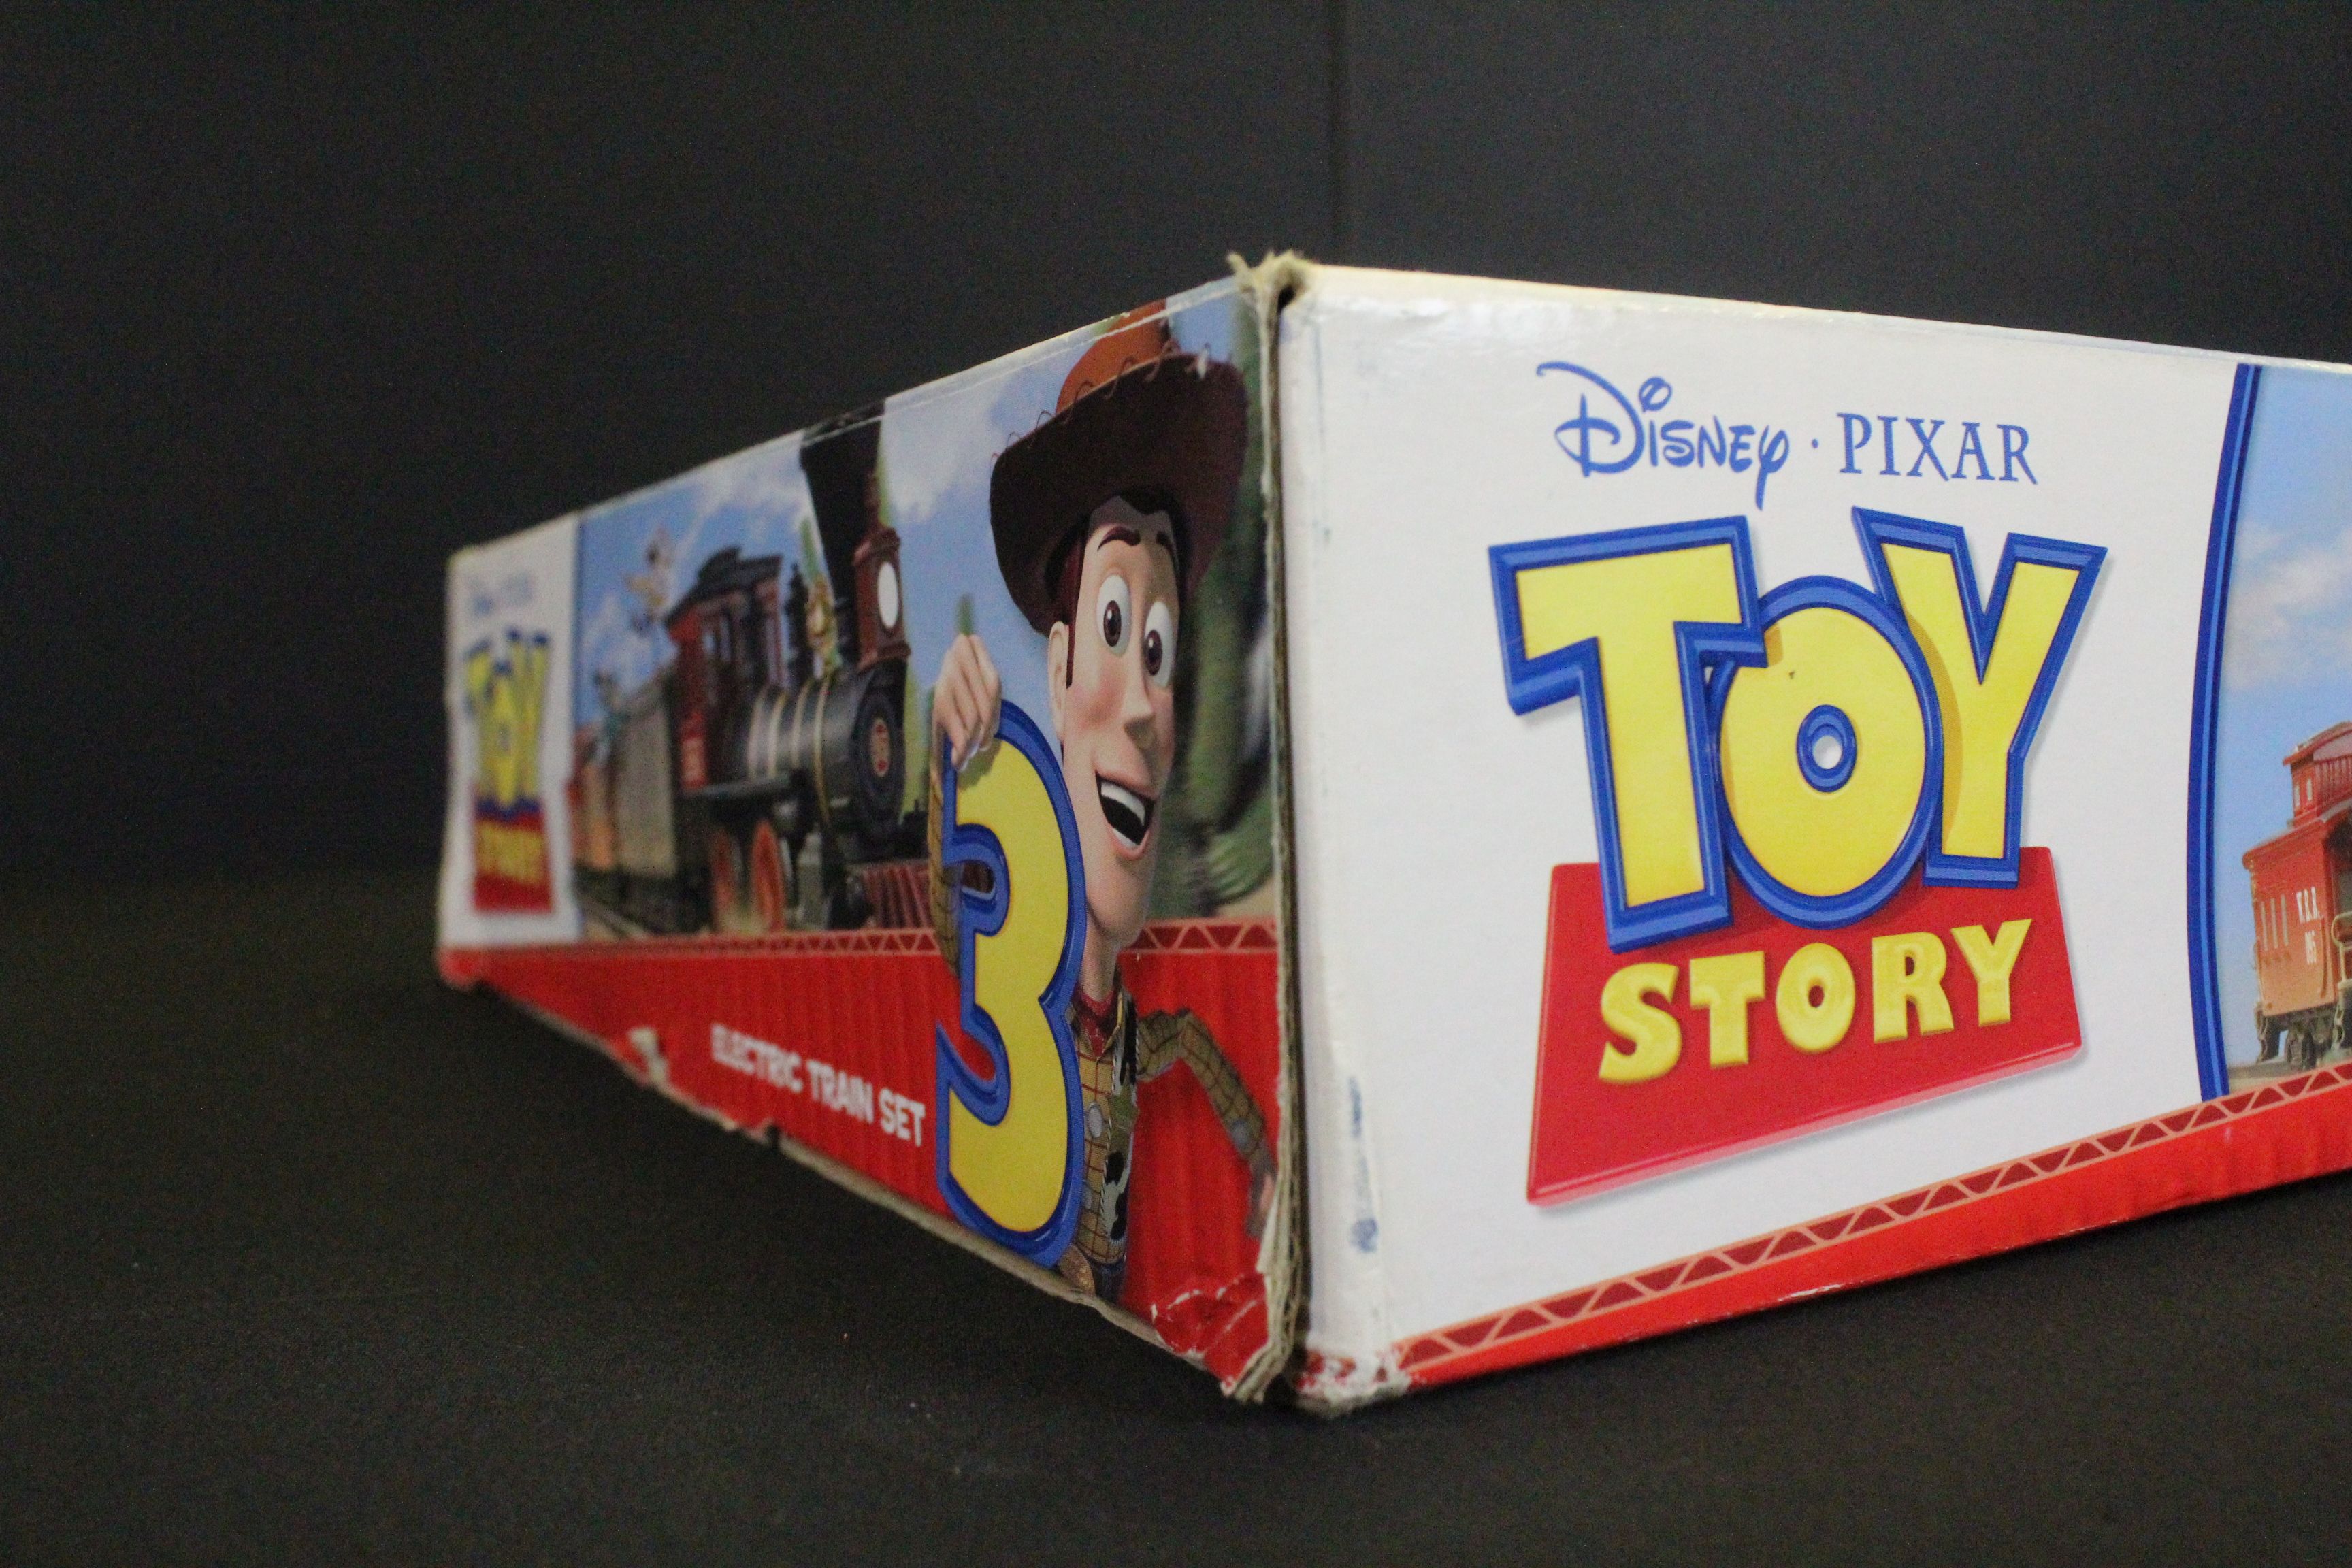 Boxed Hornby OO gauge R1149 Toy Story 3 train set, complete with locomotive, rolling stock etc - Image 3 of 7